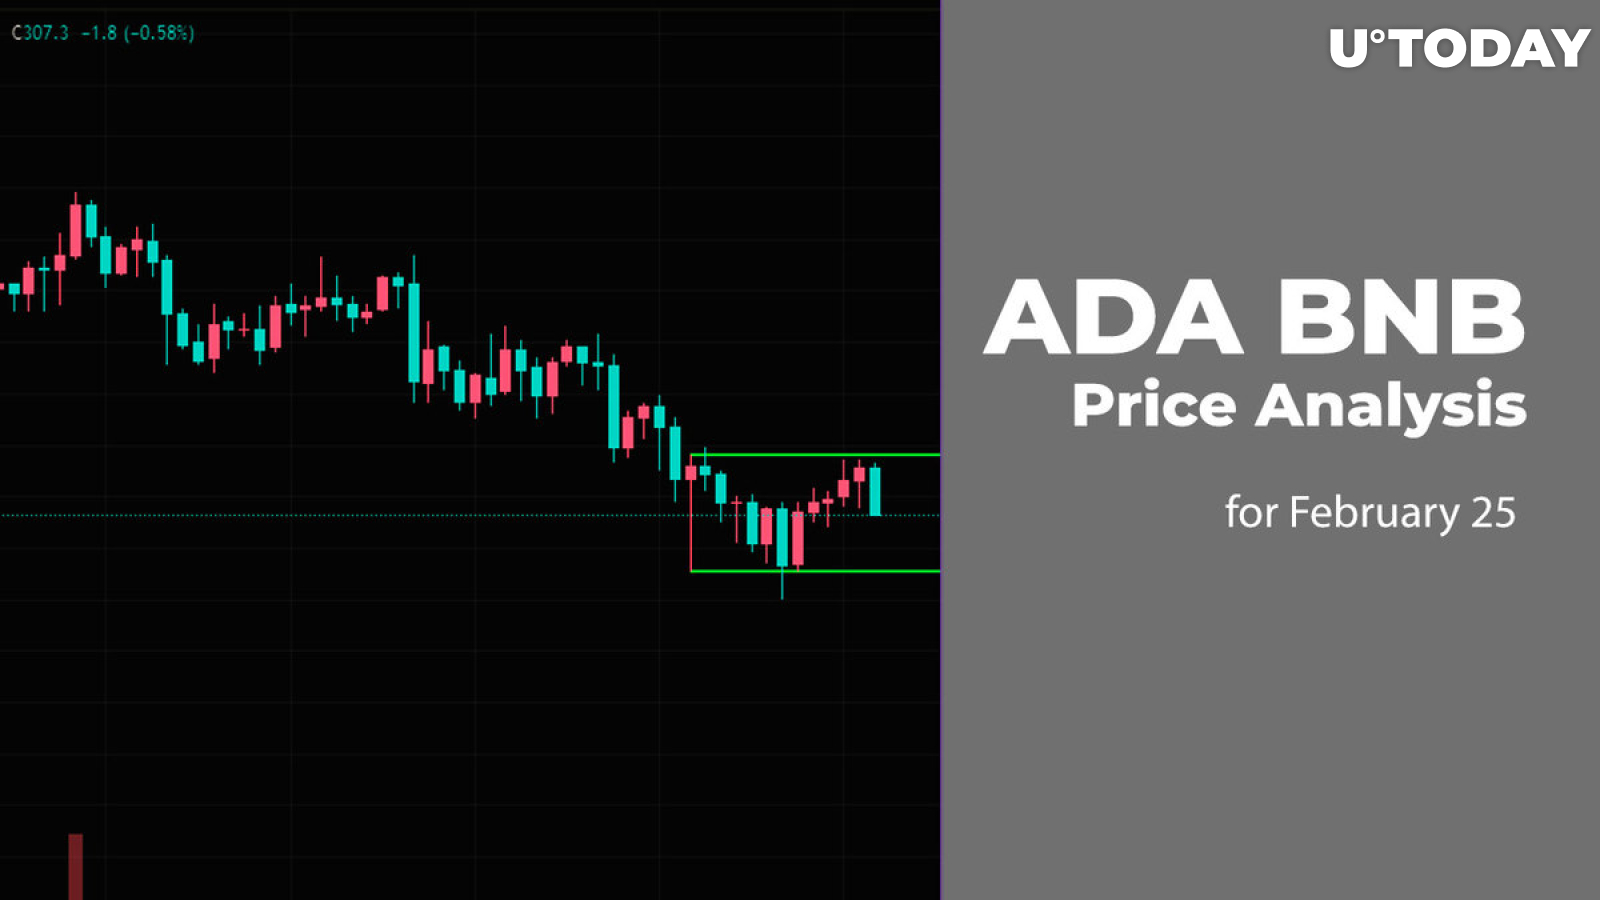 ADA and BNB Price Analysis for February 25